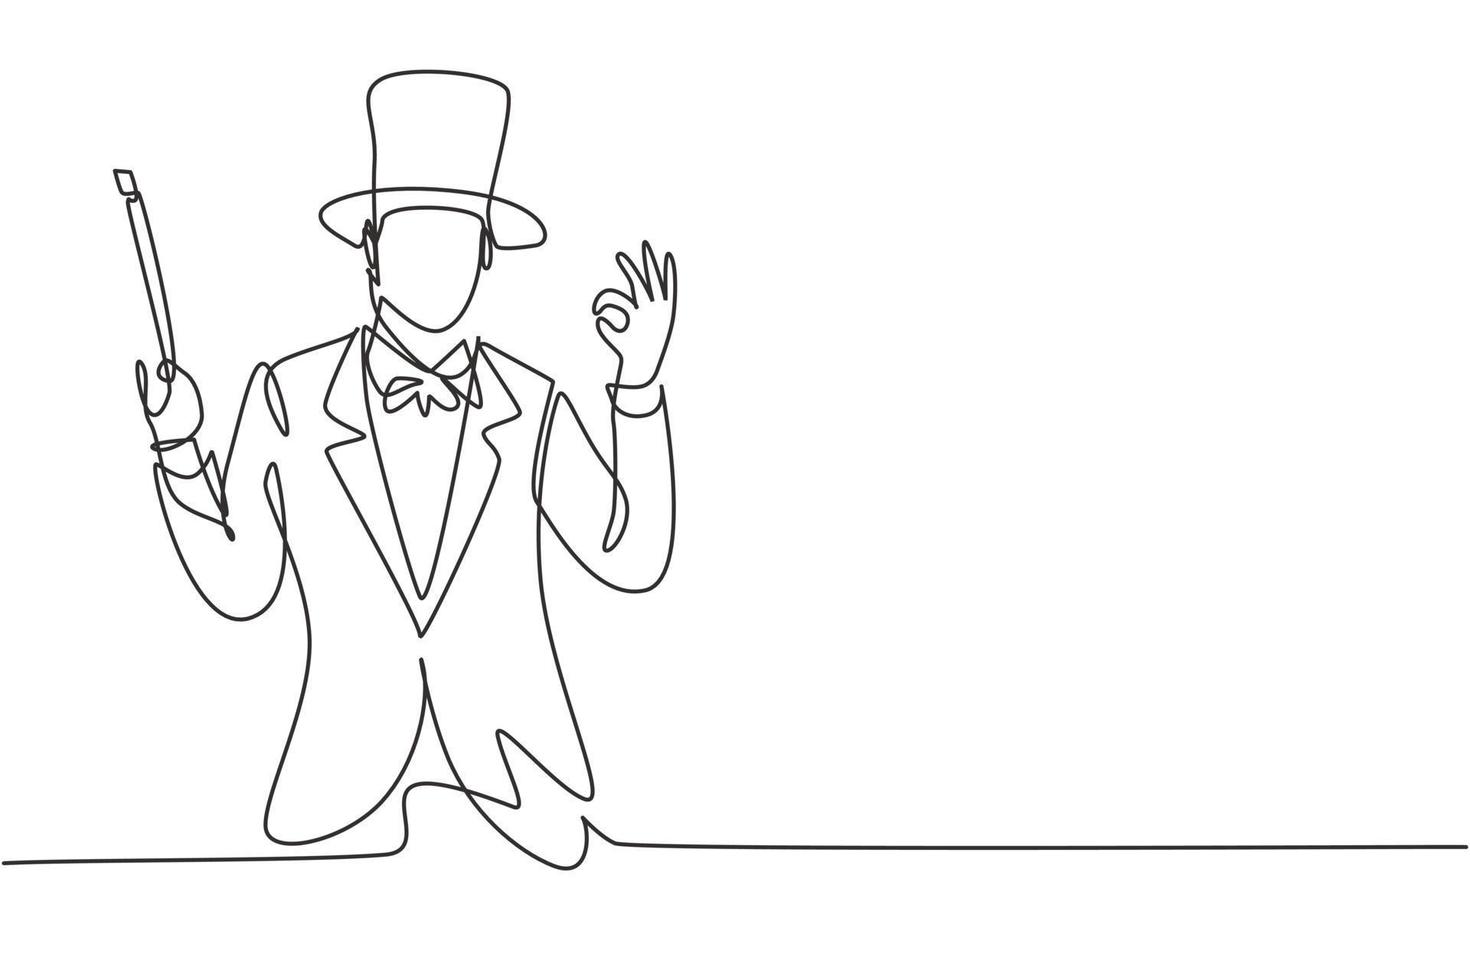 Continuous one line drawing magician with gesture okay wearing hat and holding magic stick ready to entertain audience at television show. Good job. Single line draw design vector graphic illustration